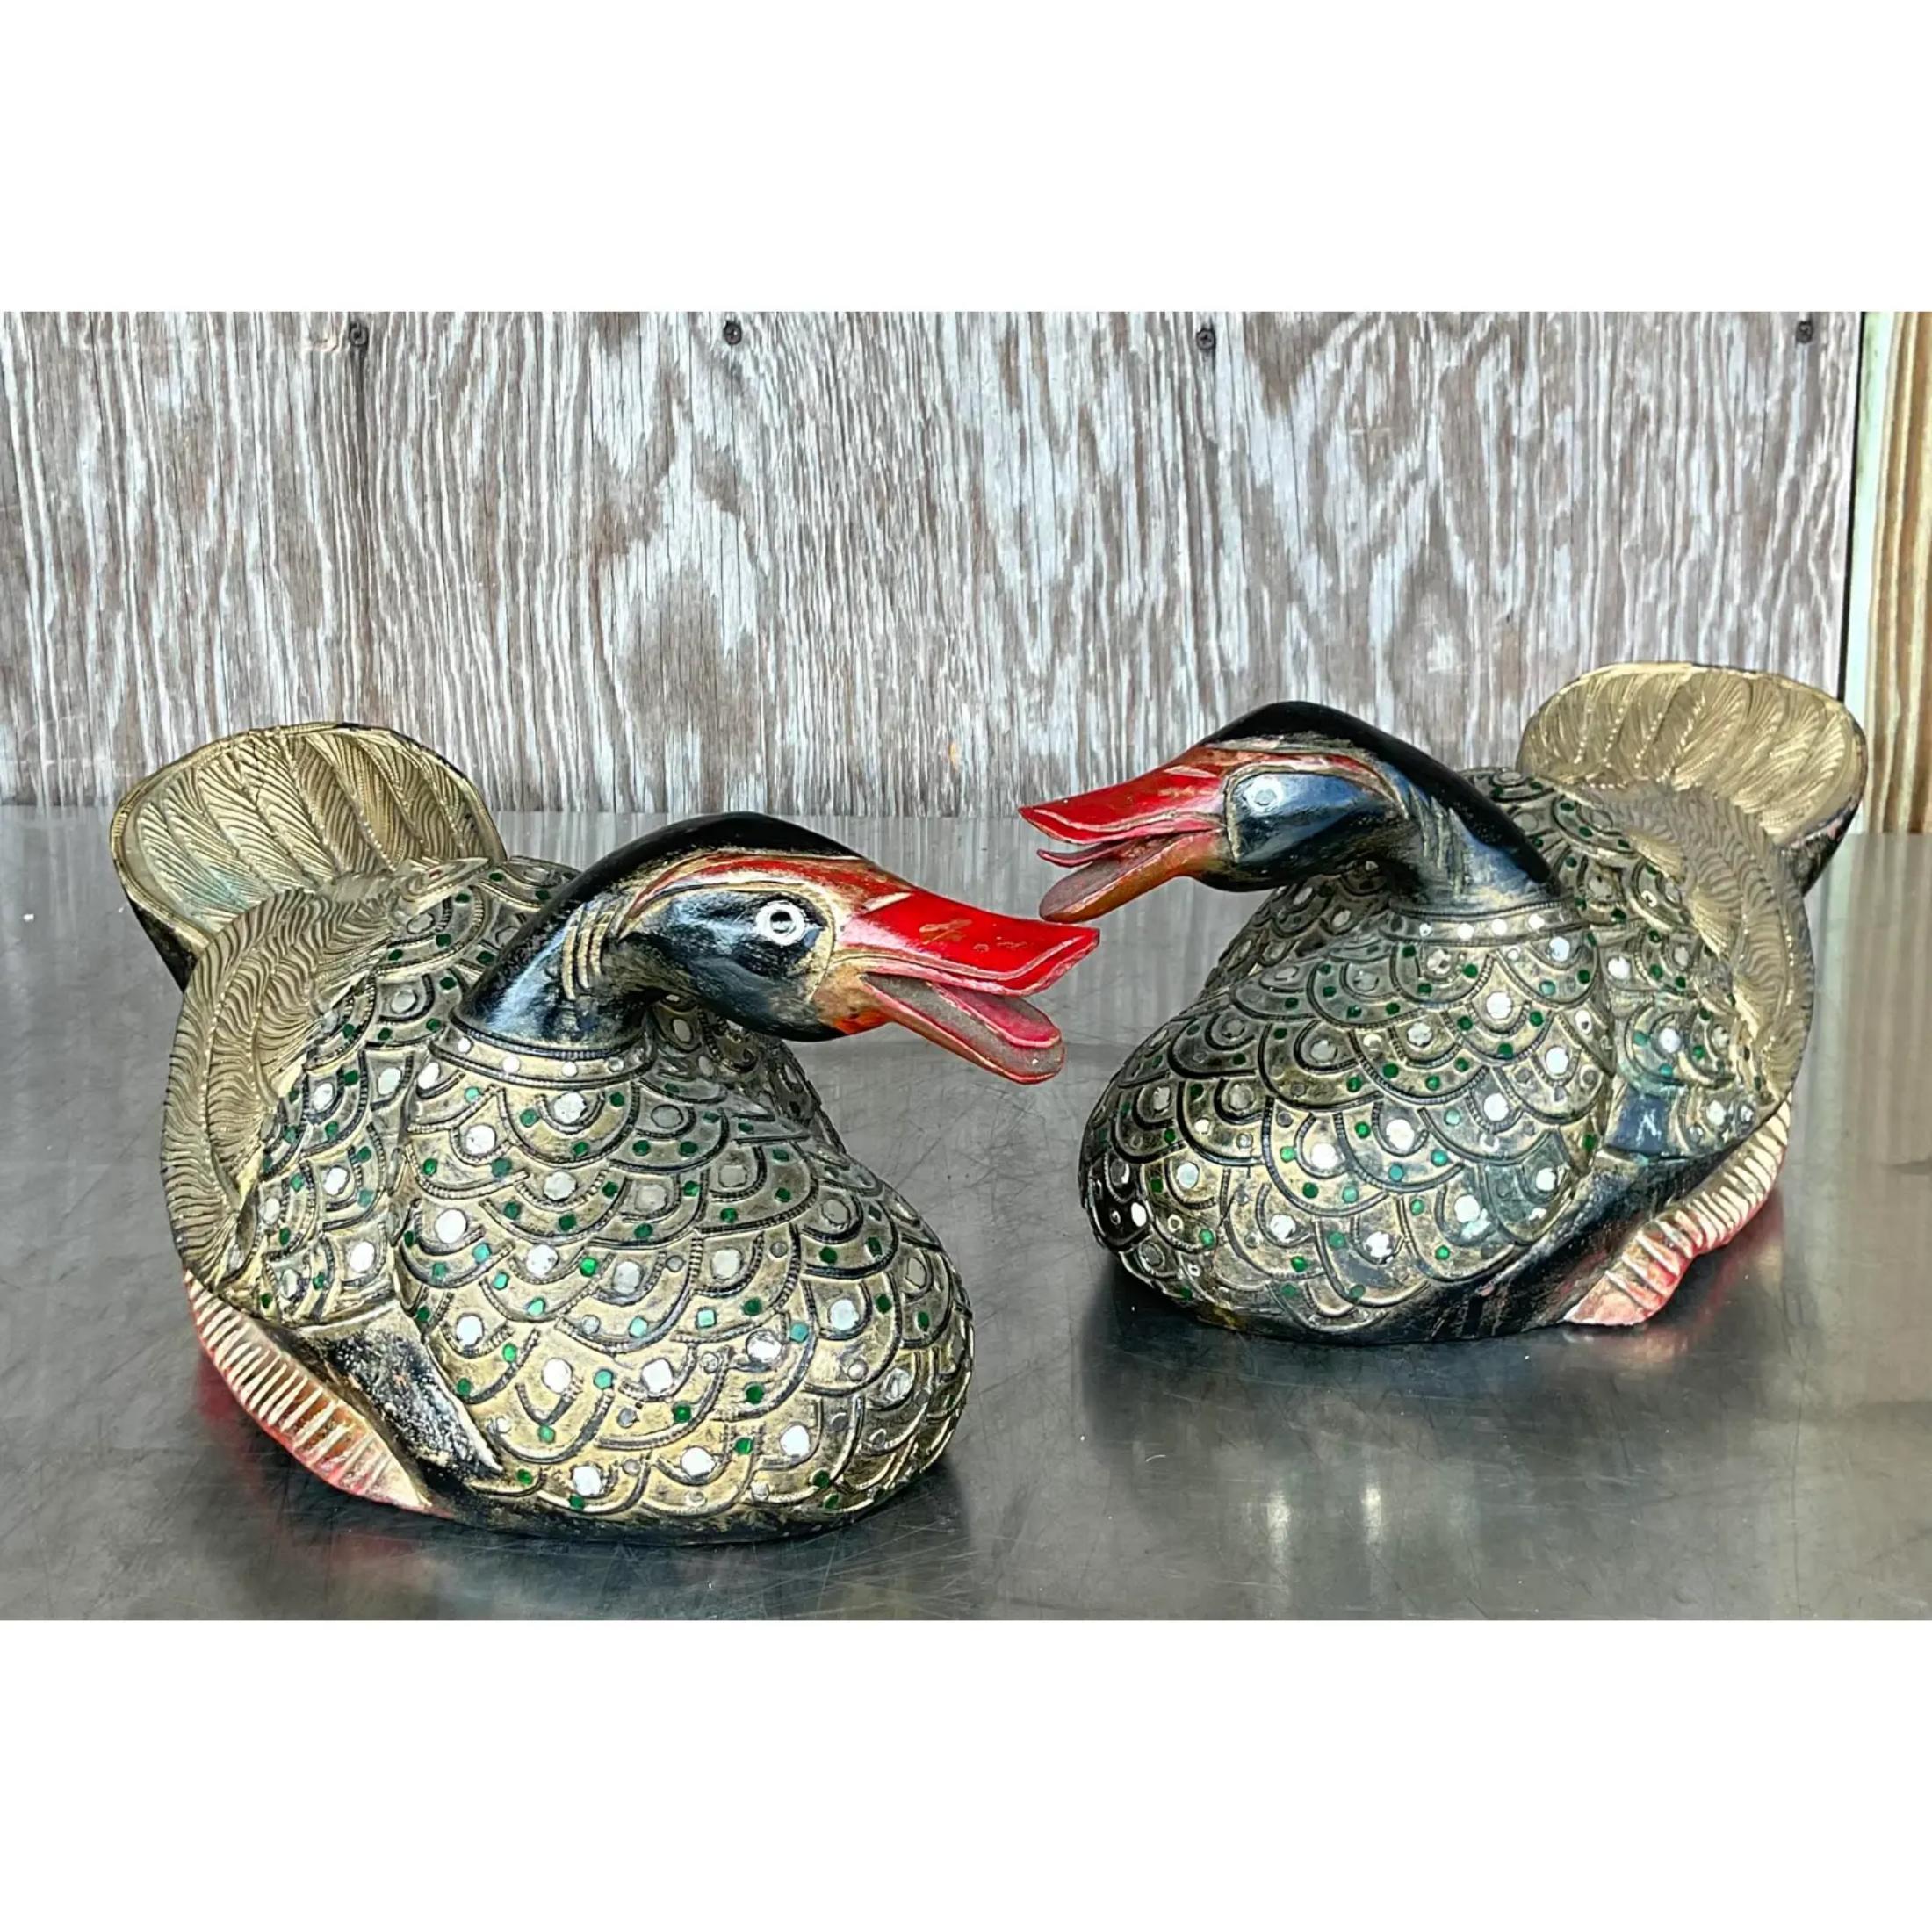 Feathers Vintage Boho Carved Wooden Ducks - a Pair For Sale